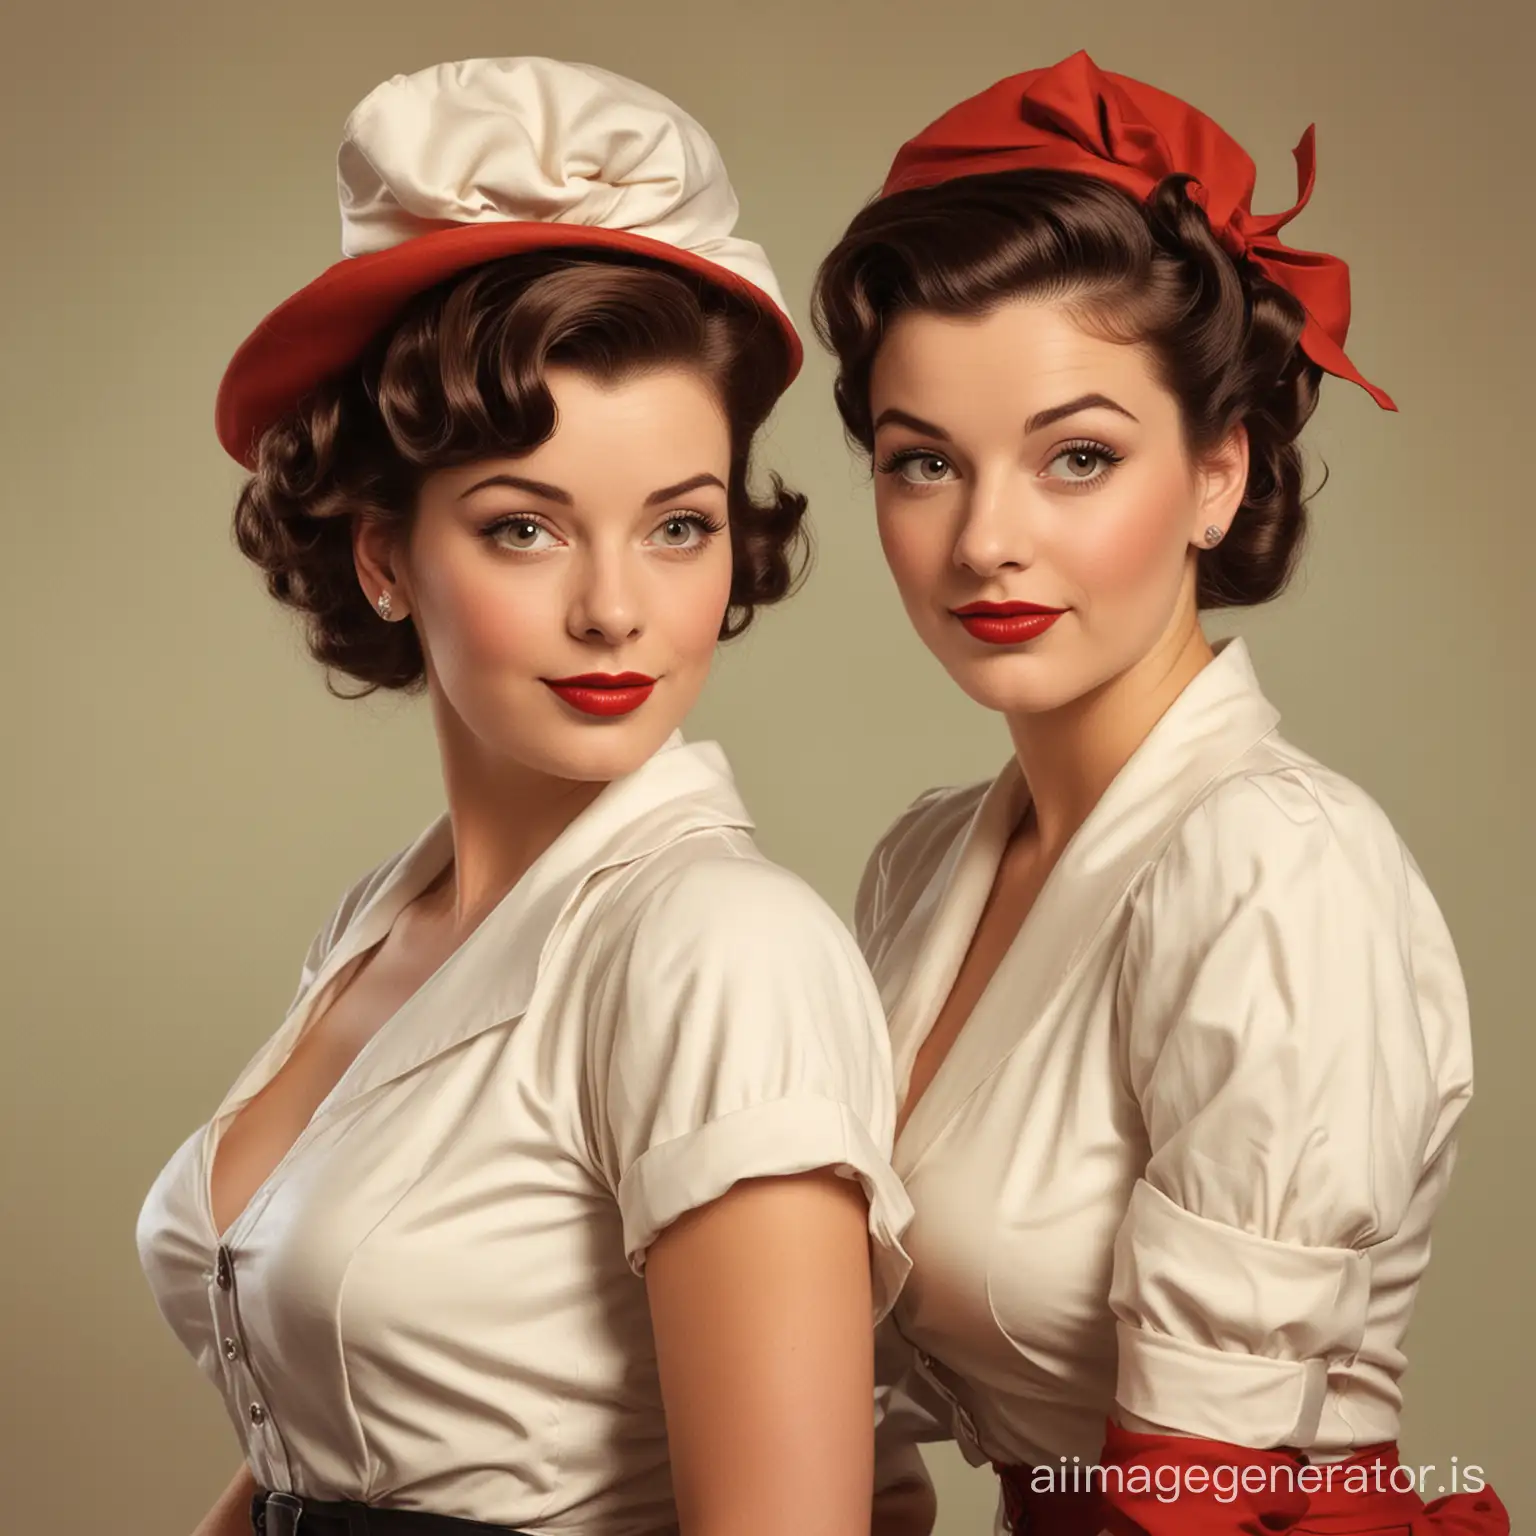 Two women in the style of Gil elvgren